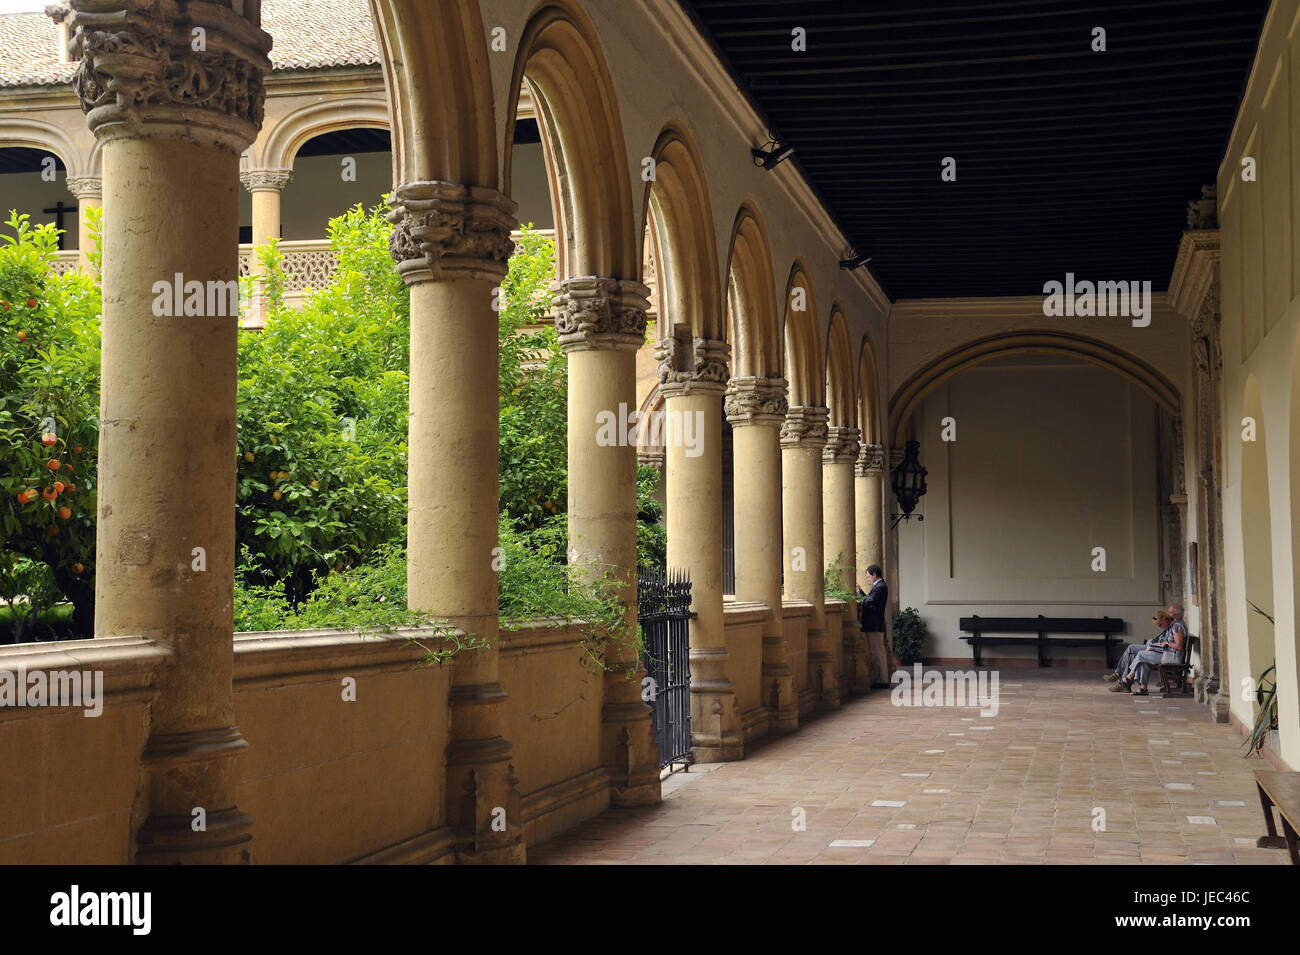 Spain, Andalusia, Granada, cloister of San Jeronimo, arcade, person in the background, Stock Photo